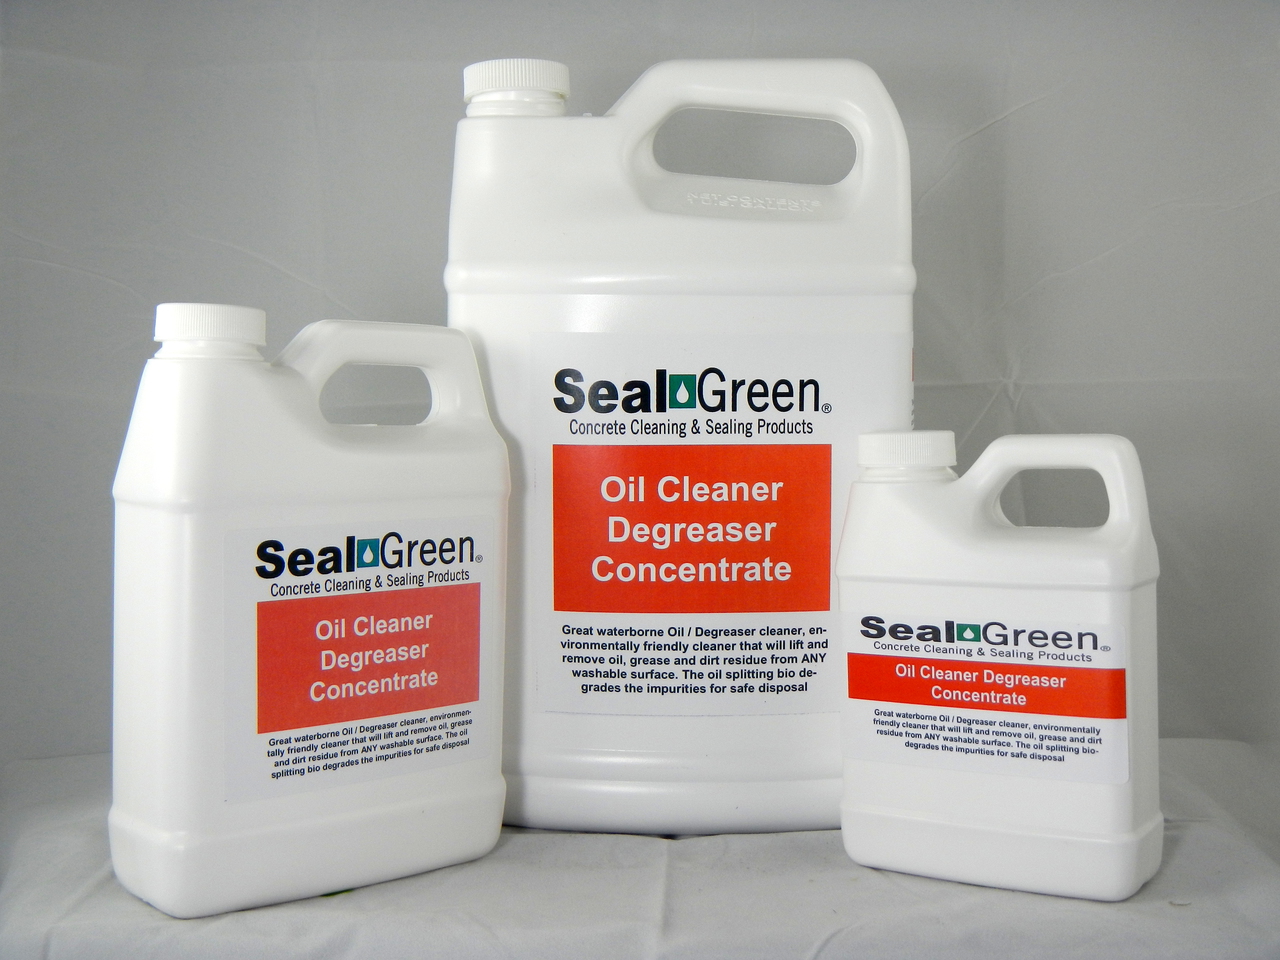 Can any of your cleaning products be used to deep clean travertine tiles in the home? Seal the tile?